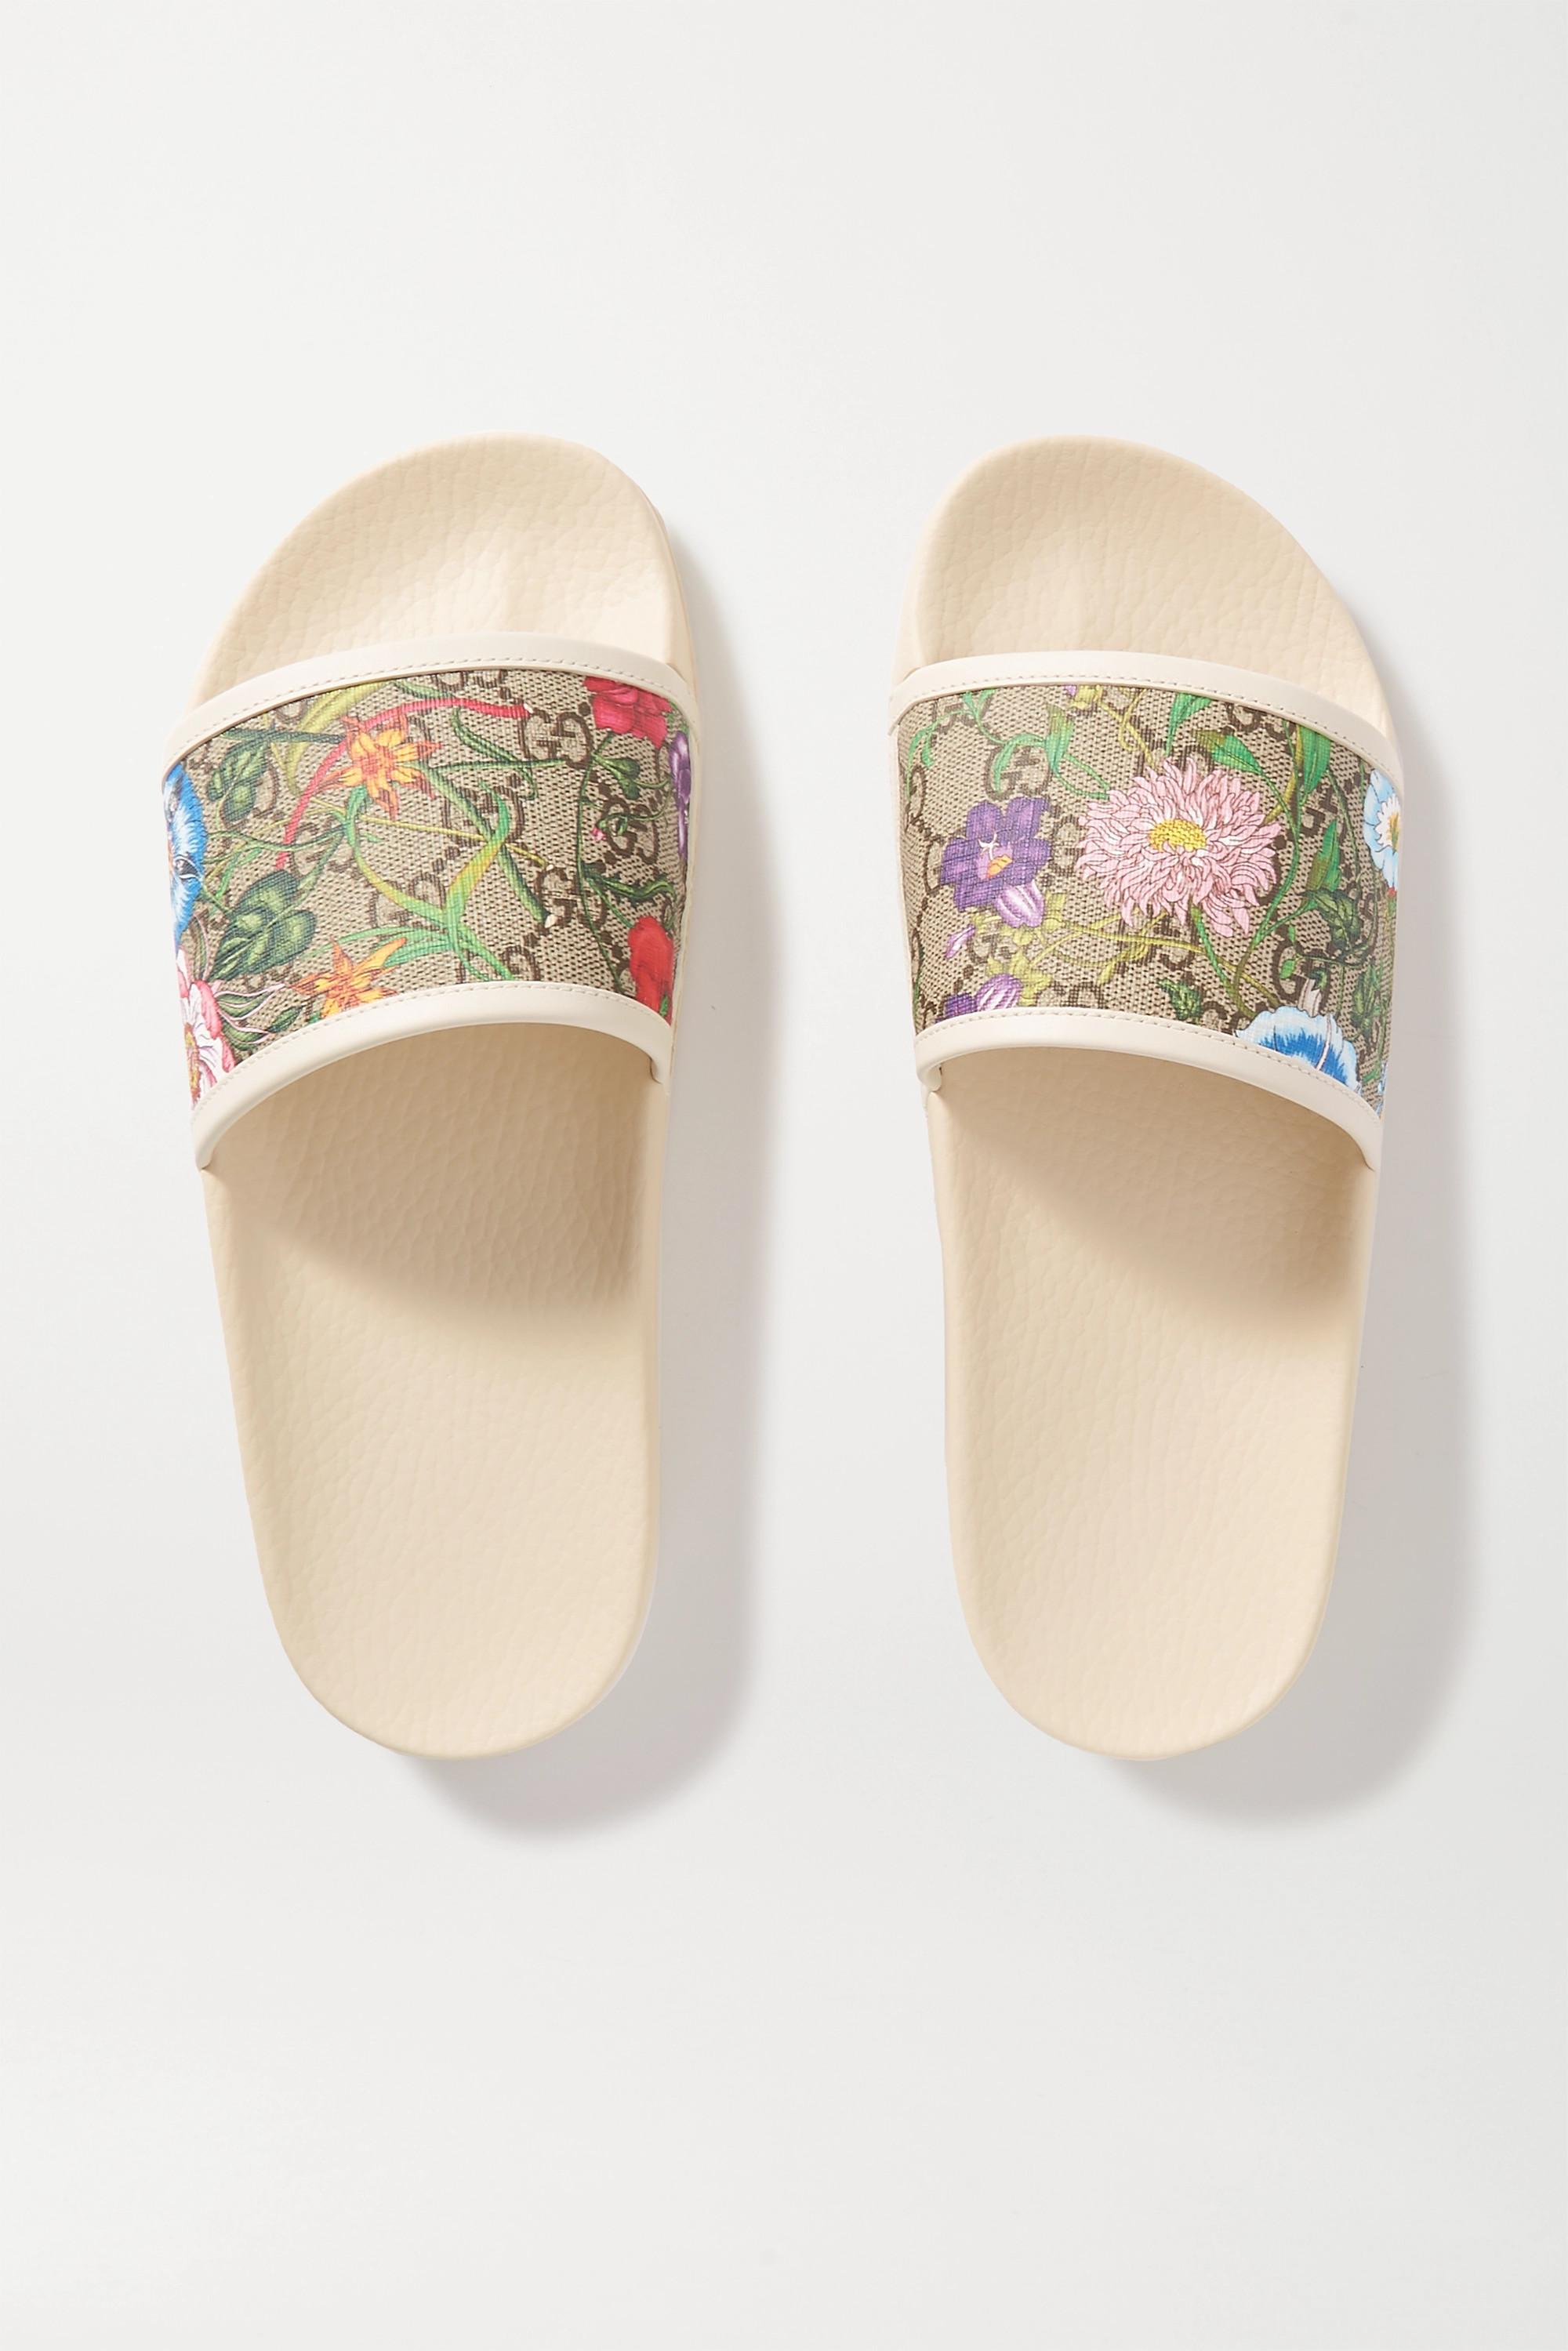 Gucci Pursuit GG Floral Slides in White | Lyst